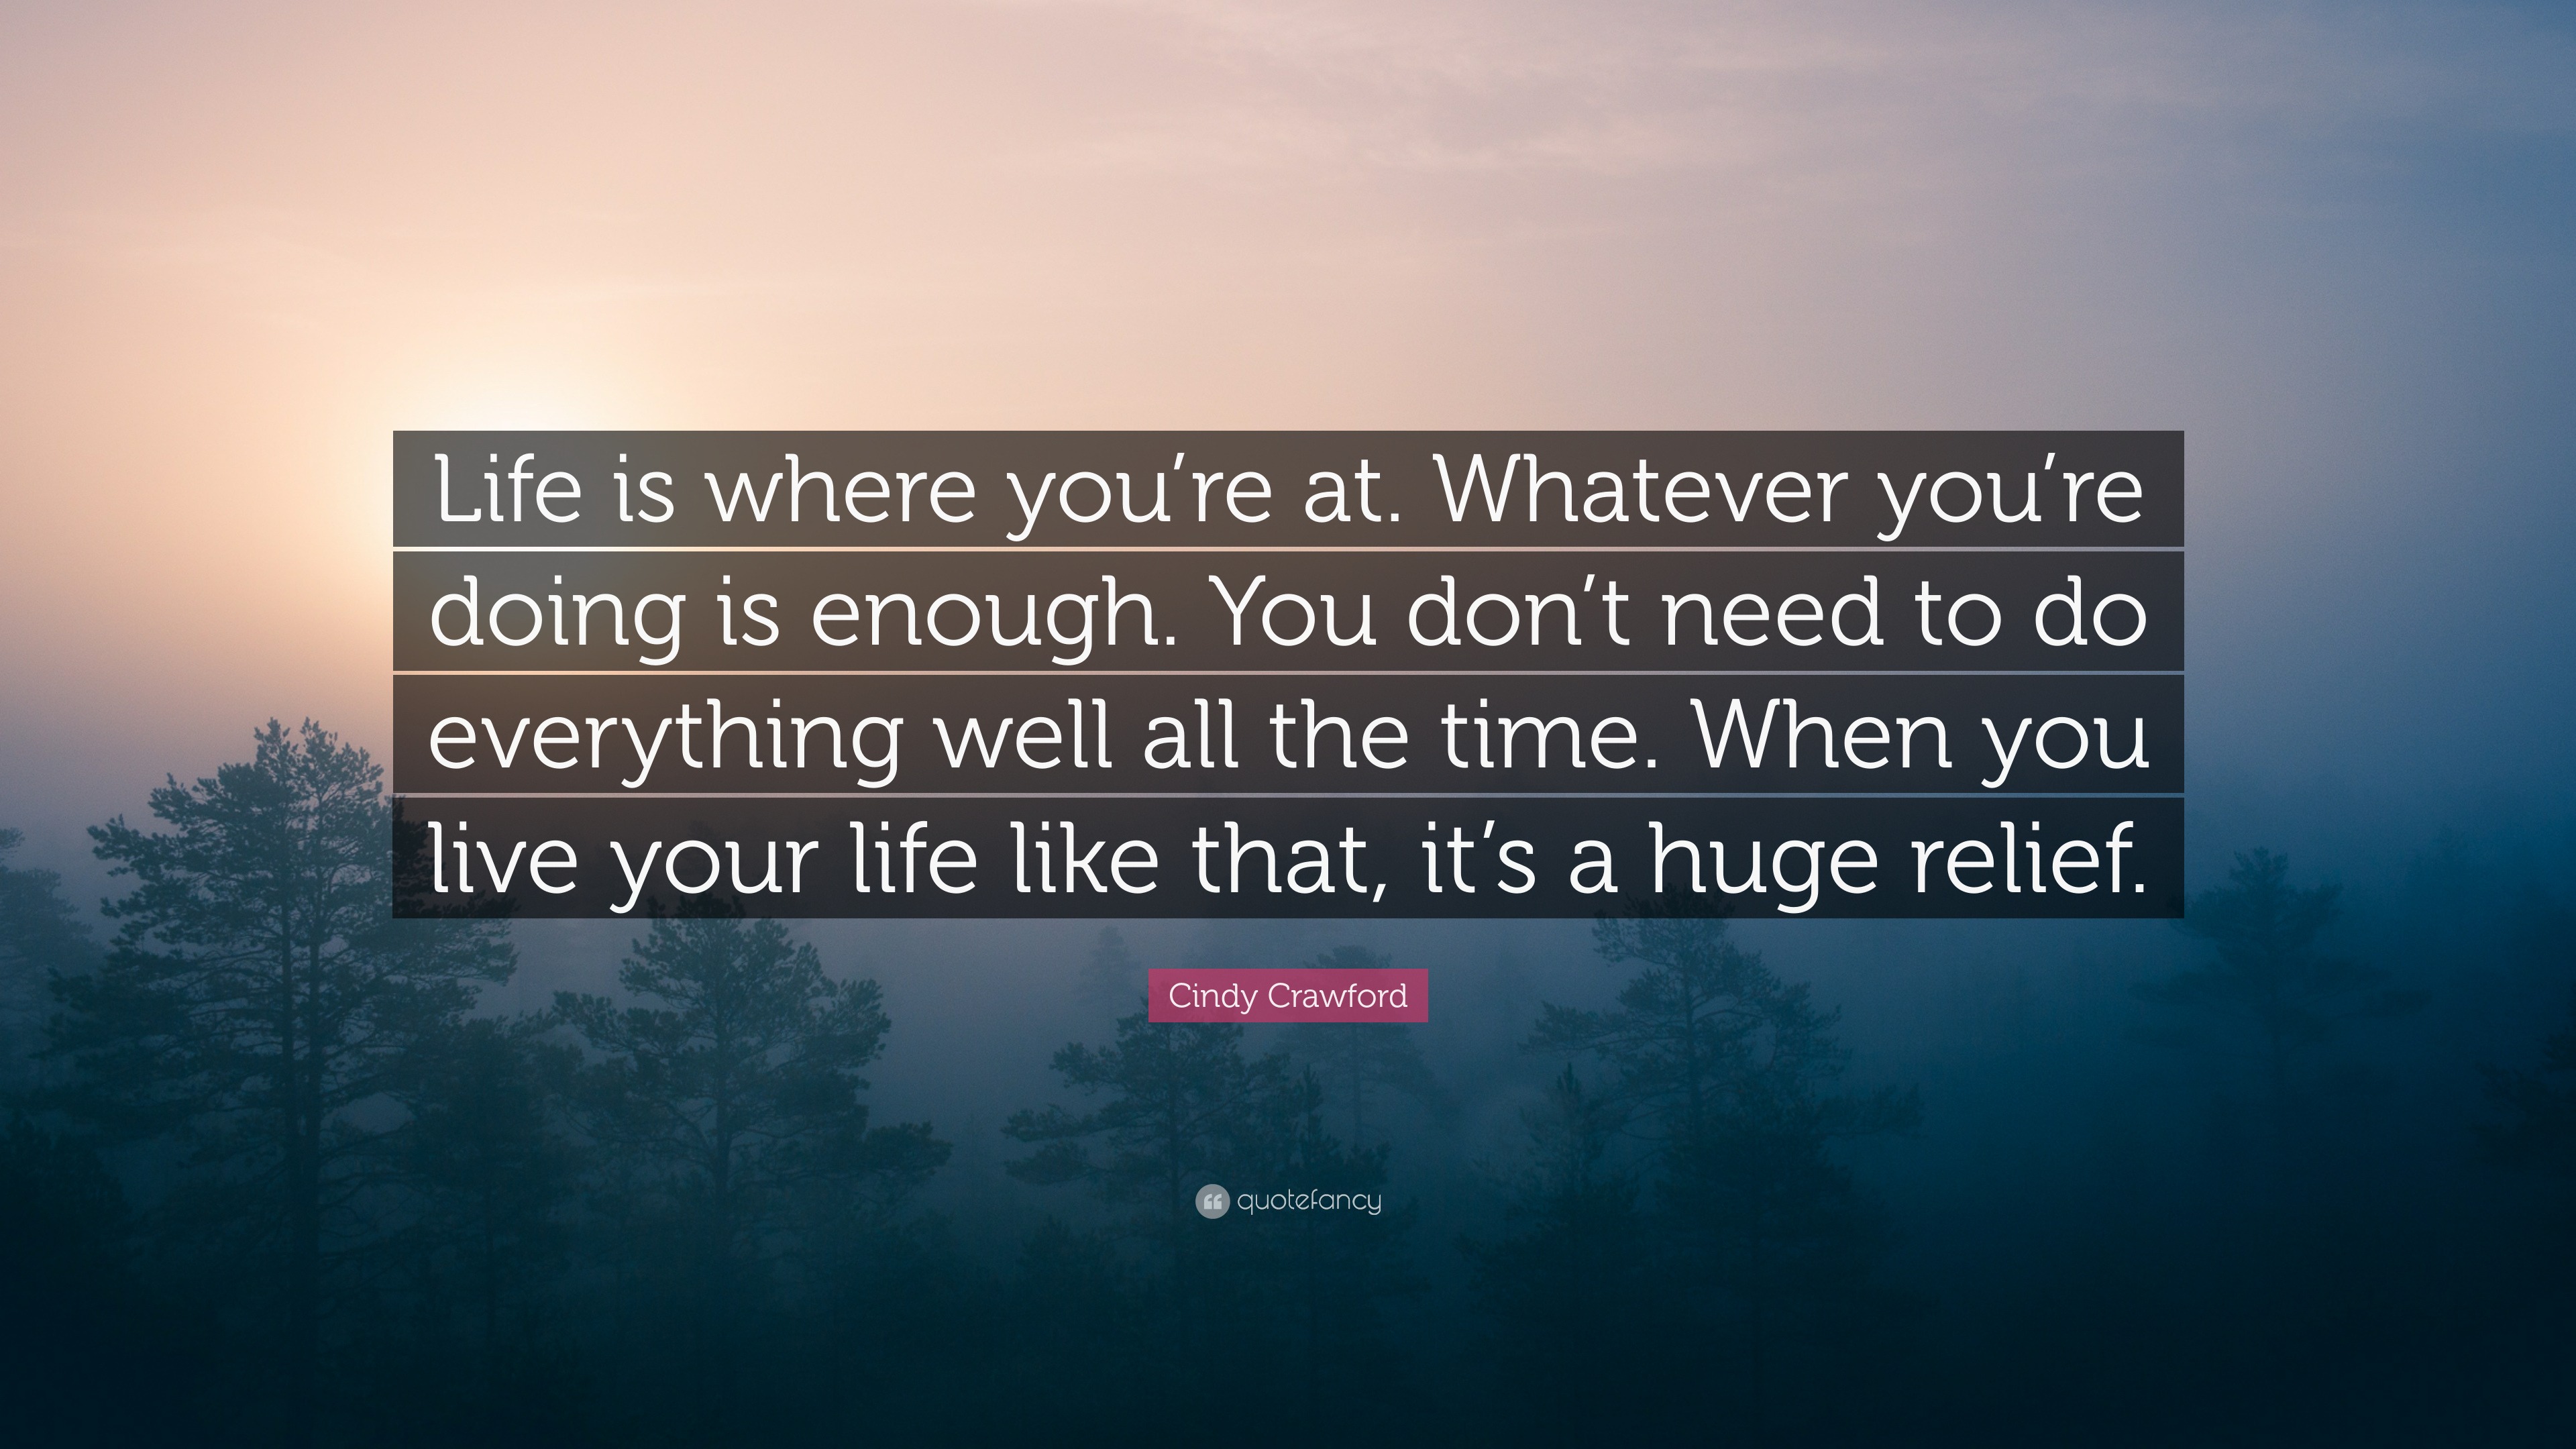 Cindy Crawford Quote: “Life is where you’re at. Whatever you’re doing ...